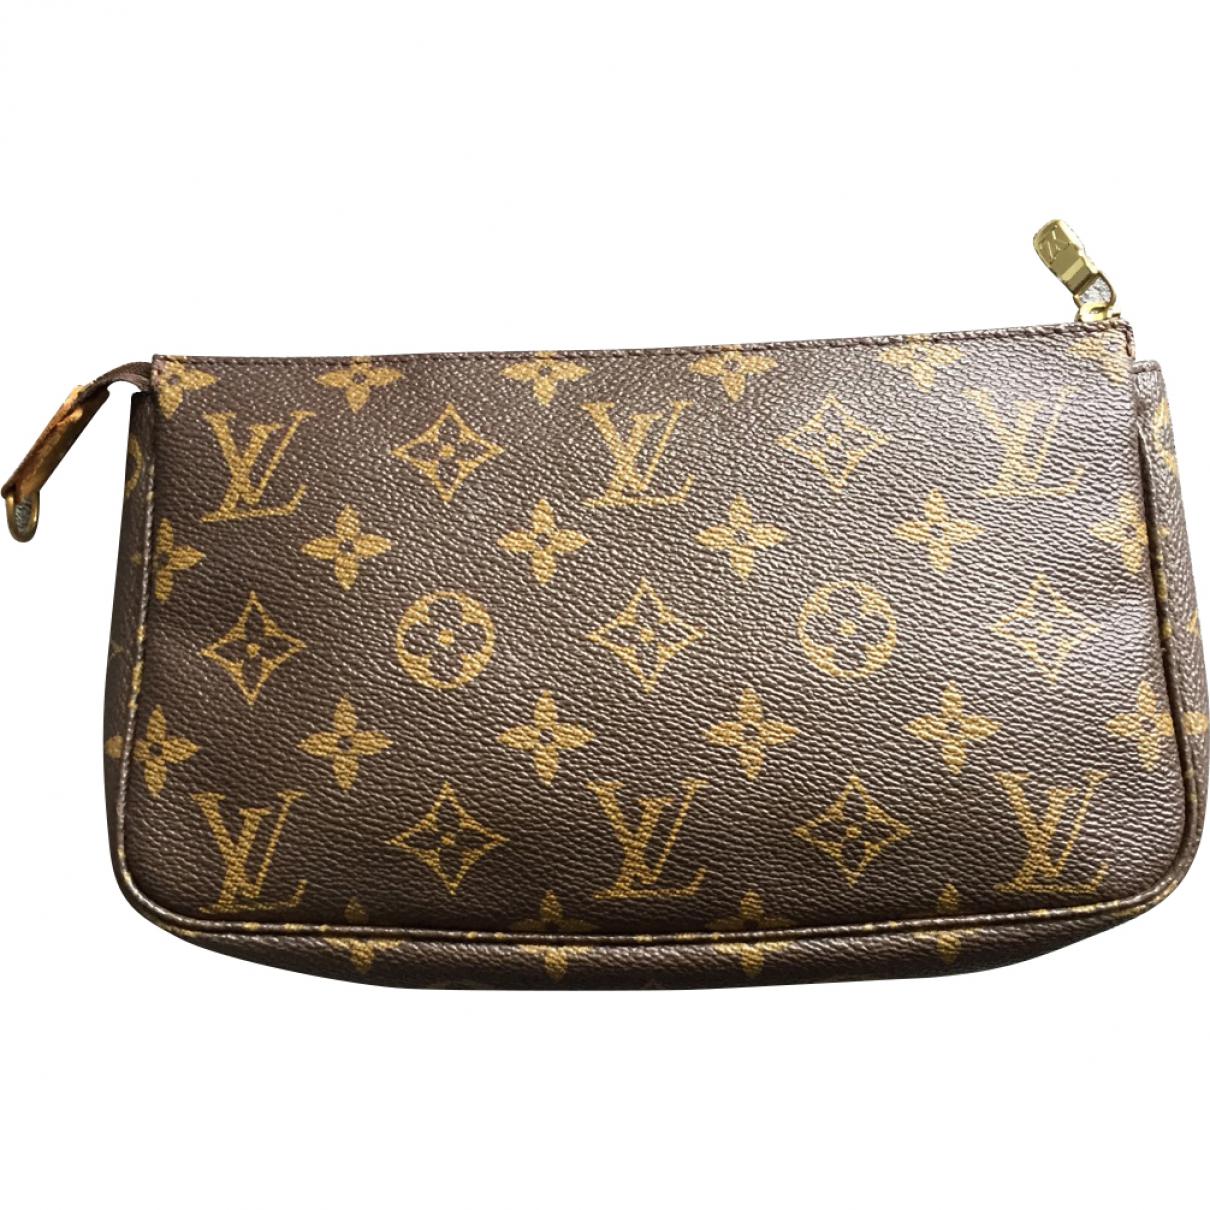 Louis Vuitton Pochette Bag Uk | Confederated Tribes of the Umatilla Indian Reservation